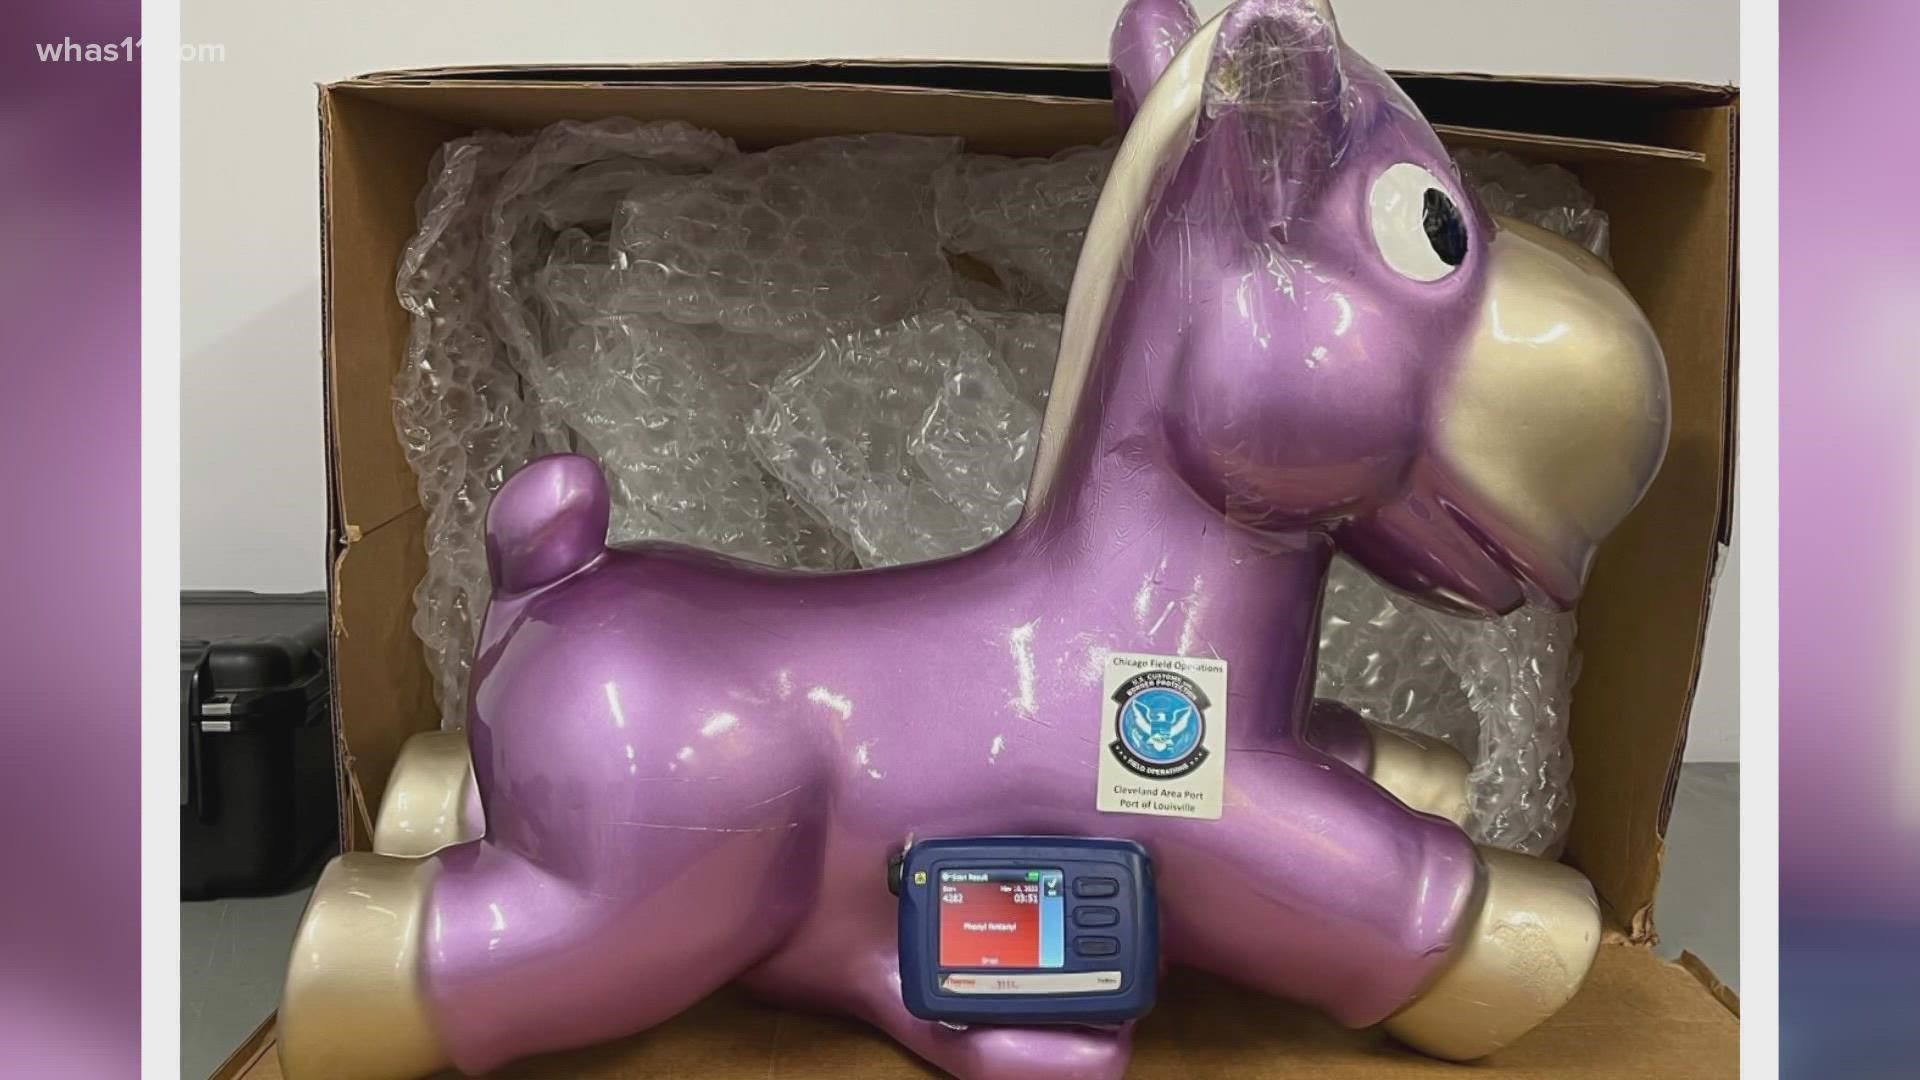 U.S. Customs and Border Patrol says they intercepted multiple boxes of children's toy and art that were laced with meth and fentanyl.